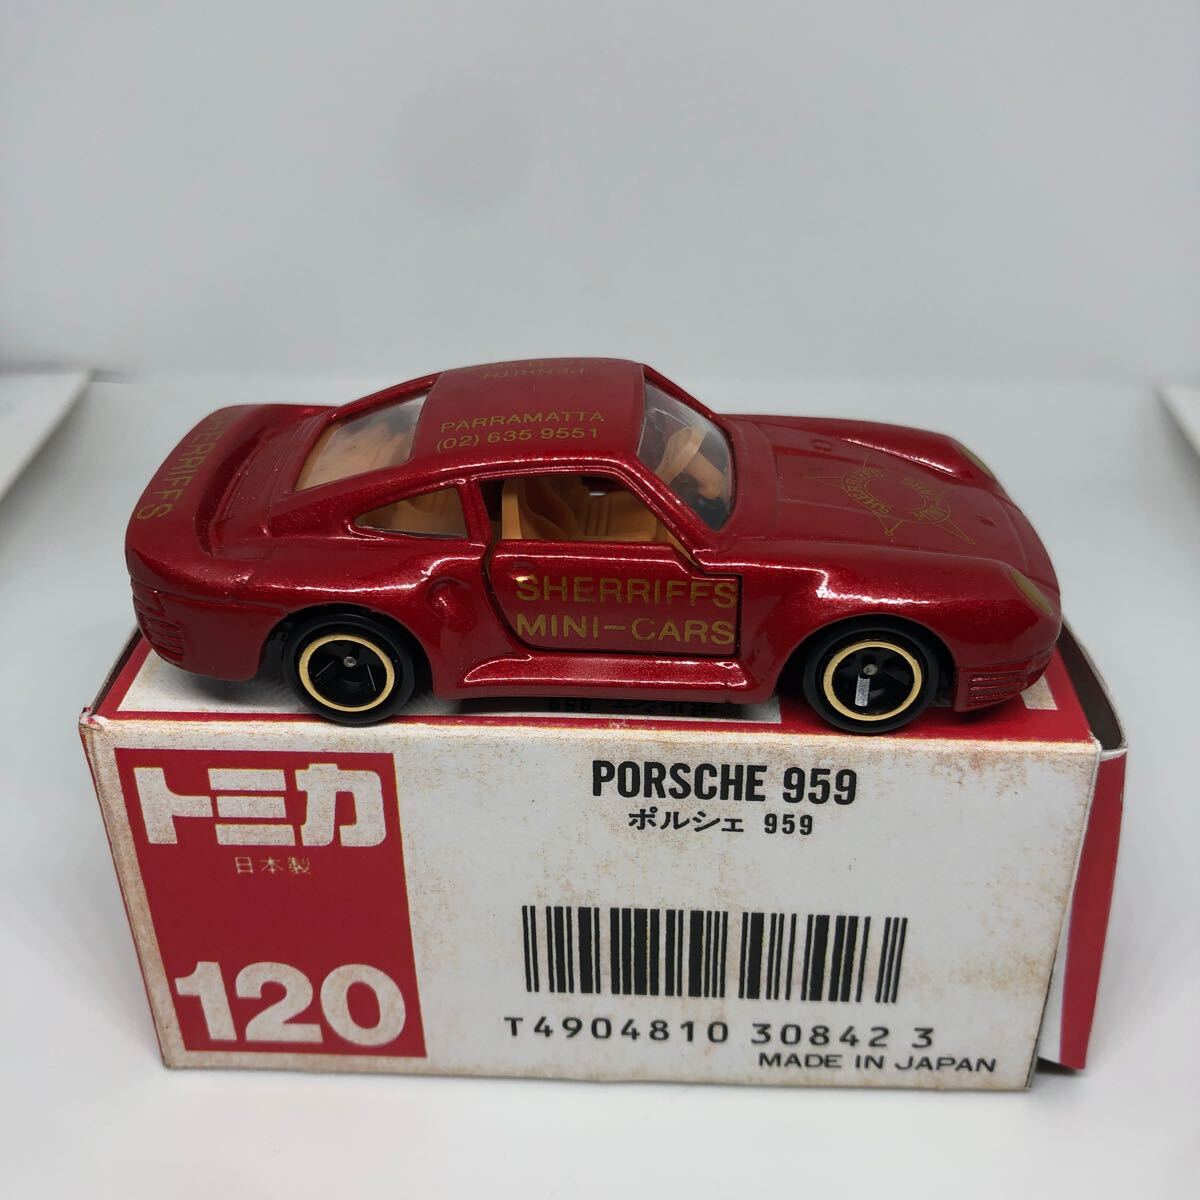  Tomica made in Japan red box 120 Porsche 959shelif special order that time thing out of print 